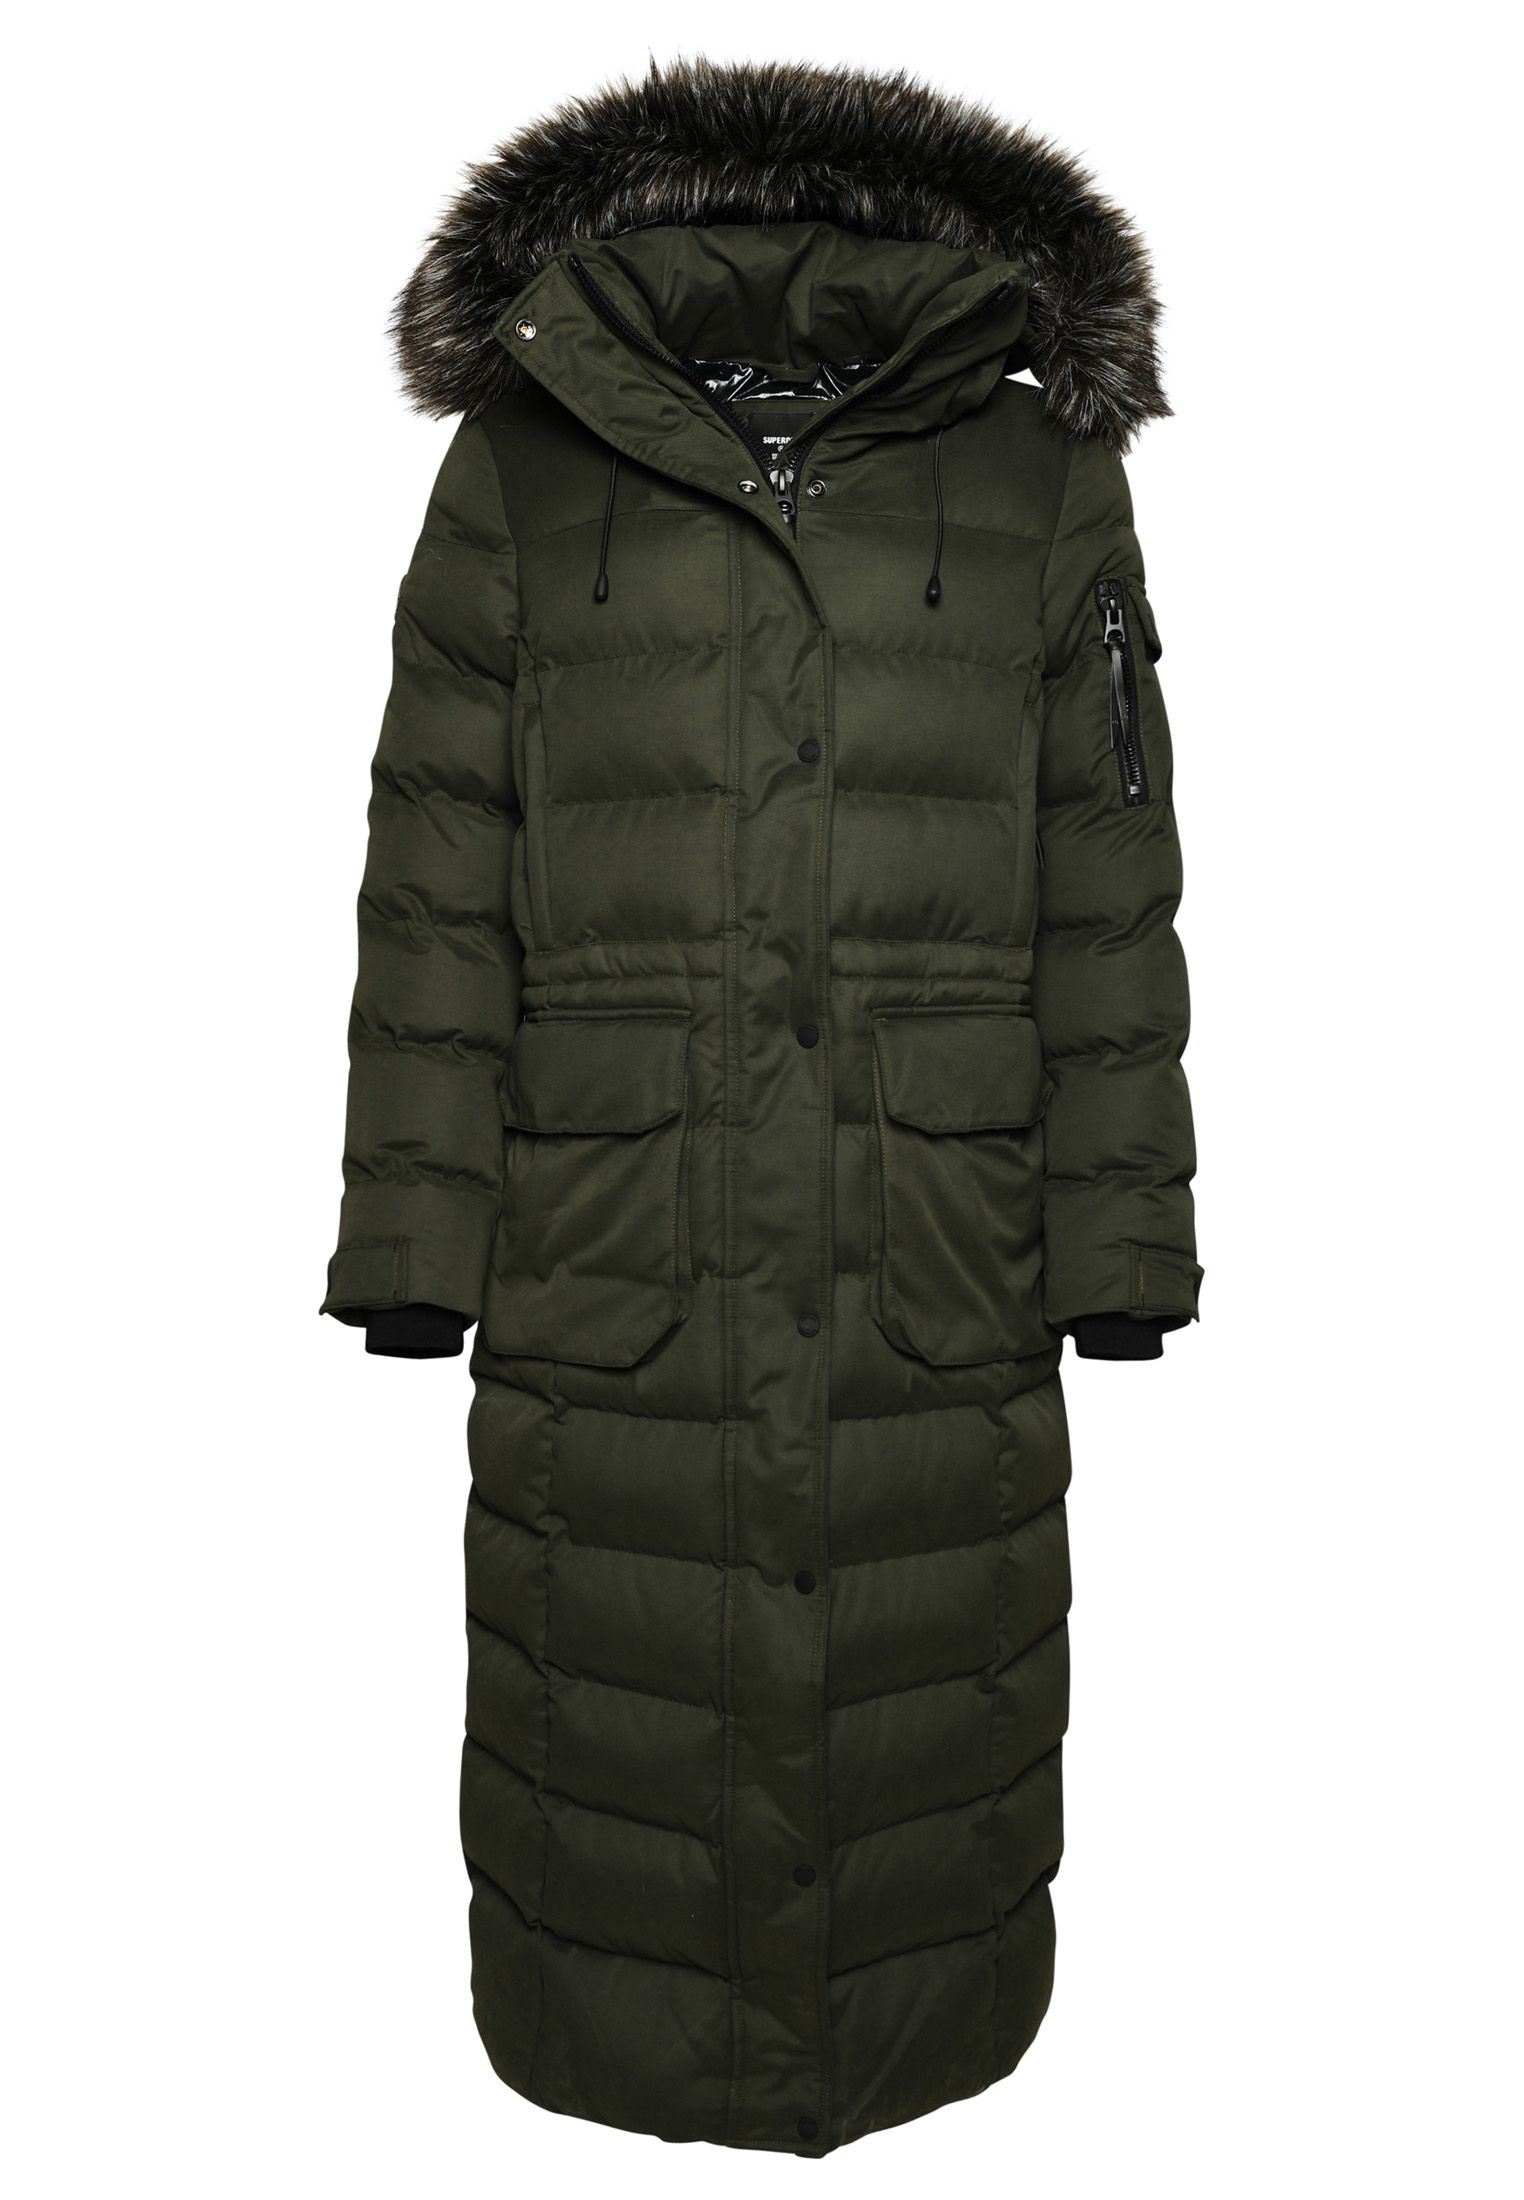 Warm up in style this winter with the Microfibre Expedition Longline Parka coat. Taking the classic parka design and making it longer and more luxurious has made this coat more distinctive, giving your winter wardrobe that added personal duvet lift. Casual, crafted and definitely functional, the Expedition longline parka will be the one you turn to.Relaxed fit – the classic Superdry fit. Not too slim, not too loose, just right. Go for your normal sizeUK10 shoulder to hem: 125cmLong-line quilted designRemovable hoodDetachable faux fur hood trimAdjustable hoodDrawstring hoodBungee cord hemTwo-way zip and popper fasteningFour-pocket designPopper cuffs with ribbed insertsTwo sleeve pocketsSignature logo badgeFully linedBungee cord waist adjusterInner mesh pocketInner zipped pocketThe padding in this jacket is 100% recycled, each jacket contains up to 30 recycled bottles, this avoids these bottles being sent to landfill or polluting our oceans.